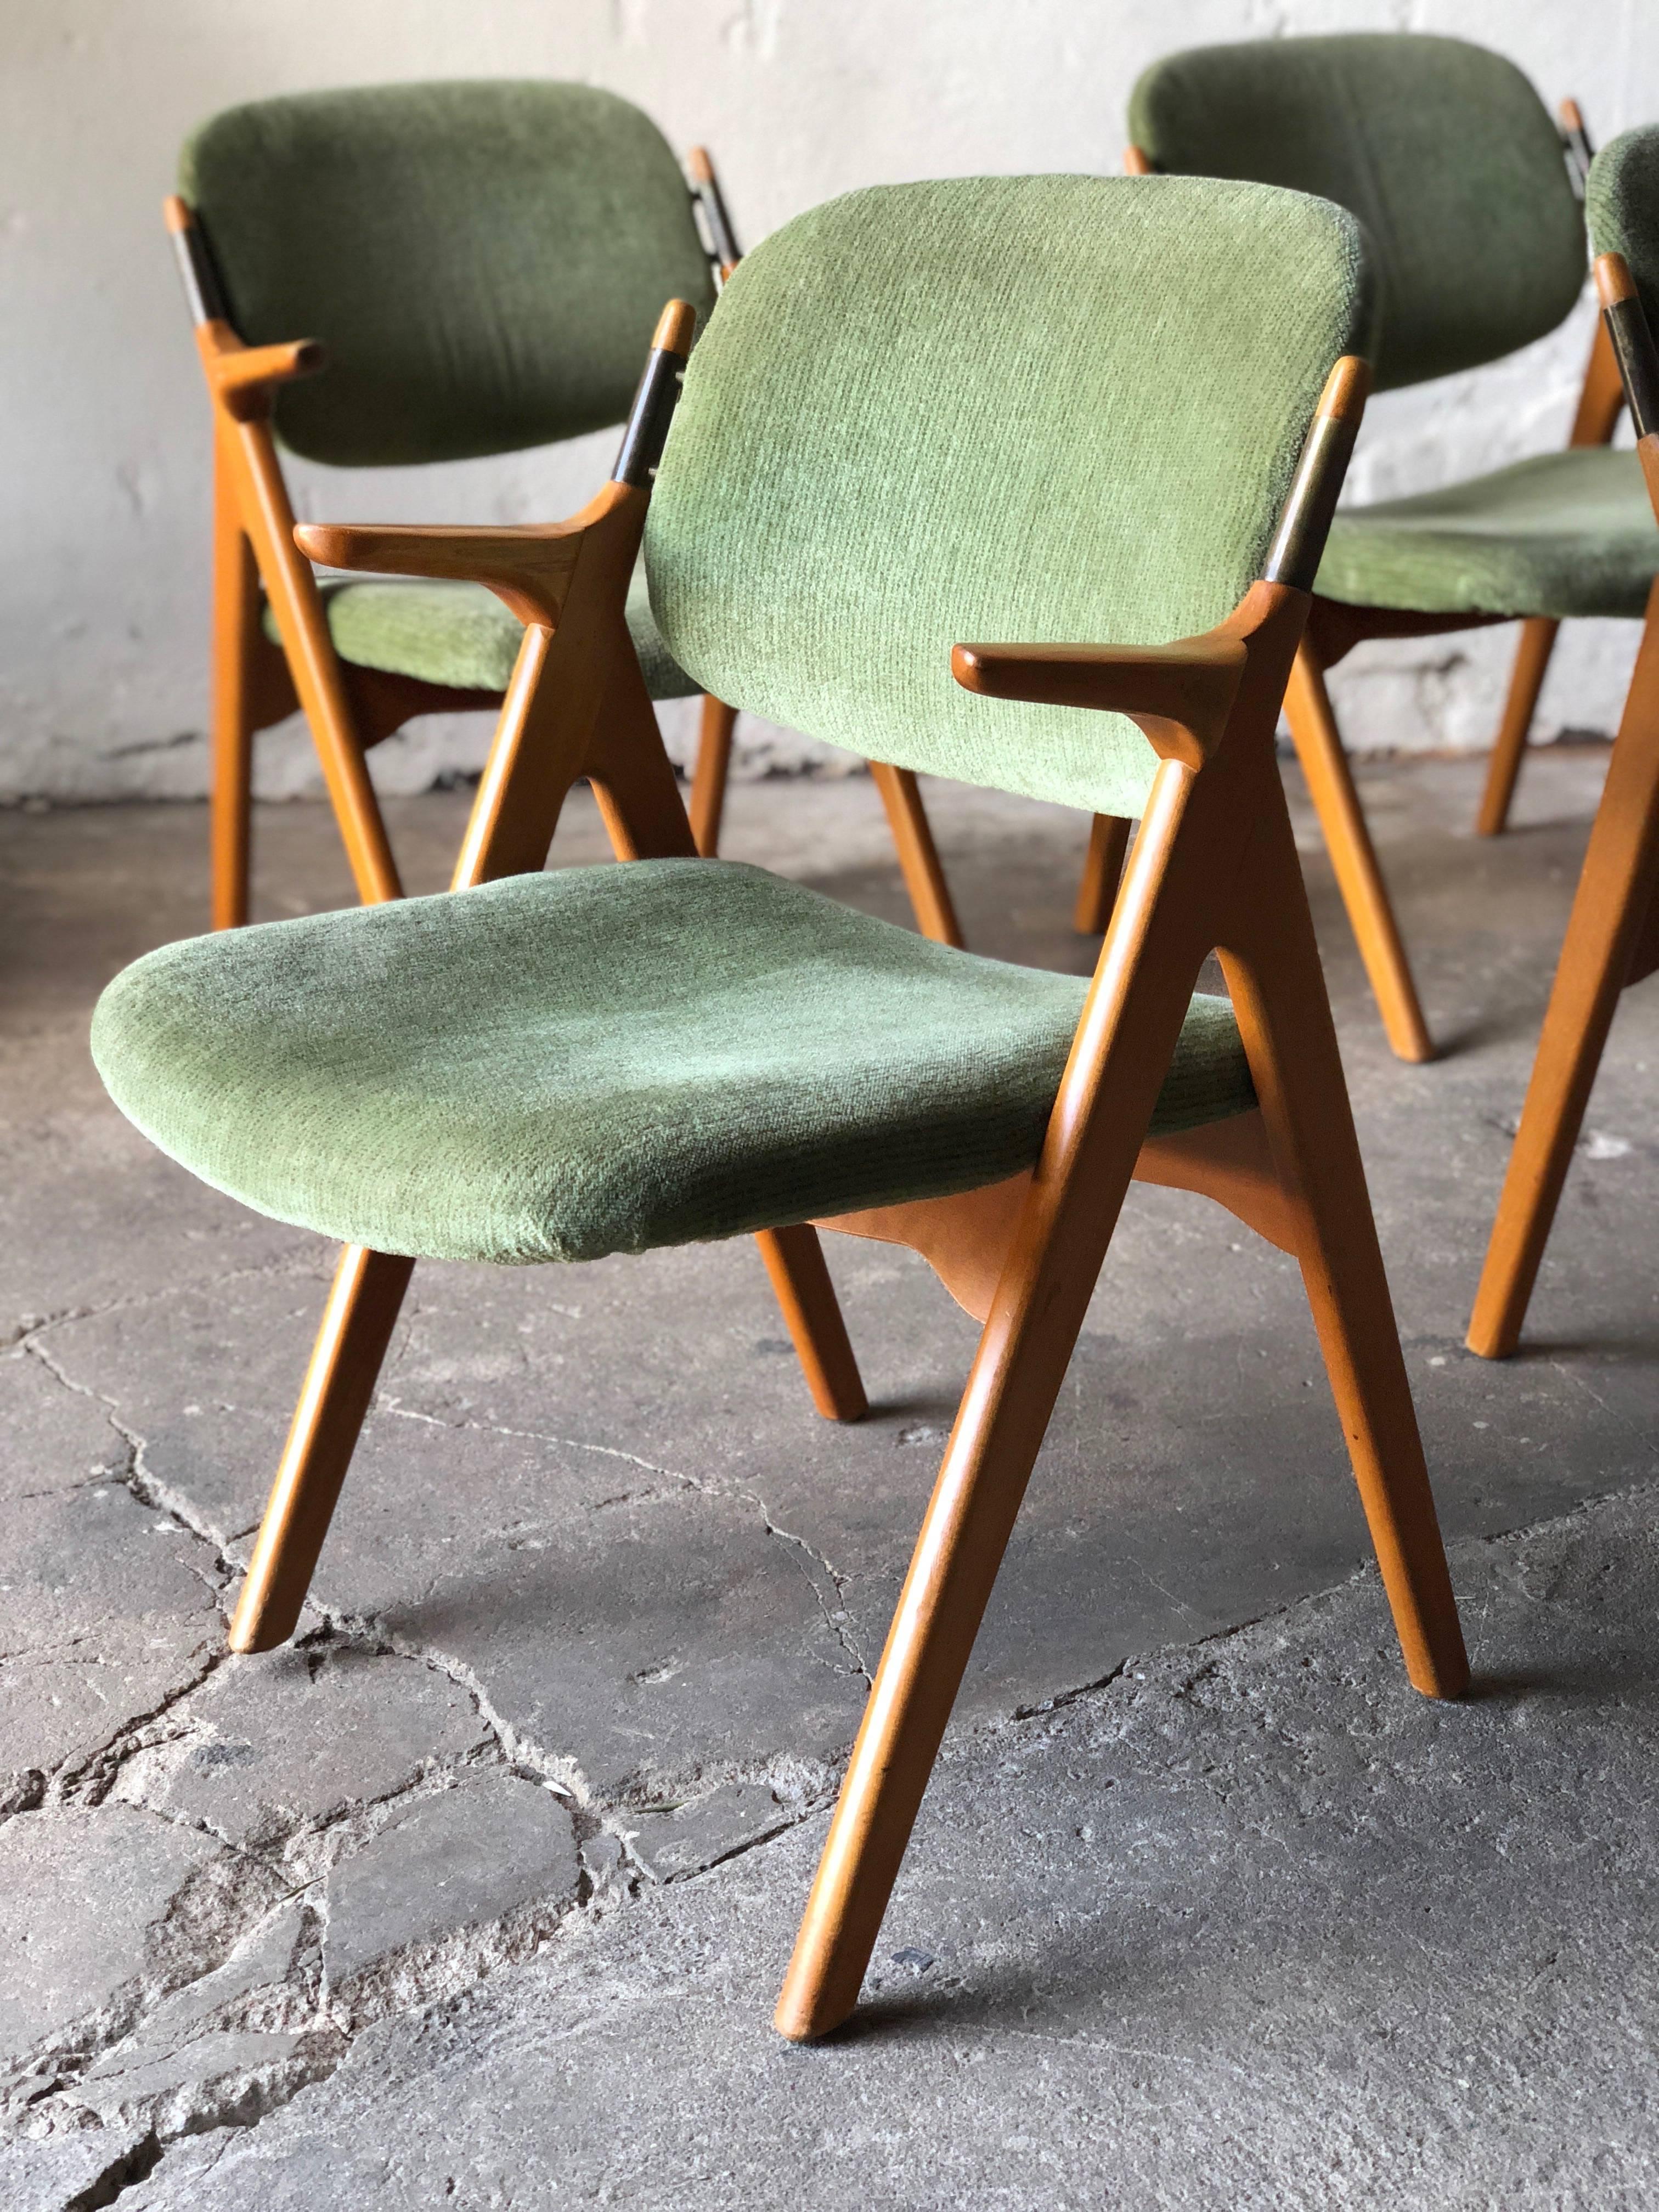 Scandinavian Modern Armchairs in Birch with Original Upholstery 1950s Vintage For Sale 4